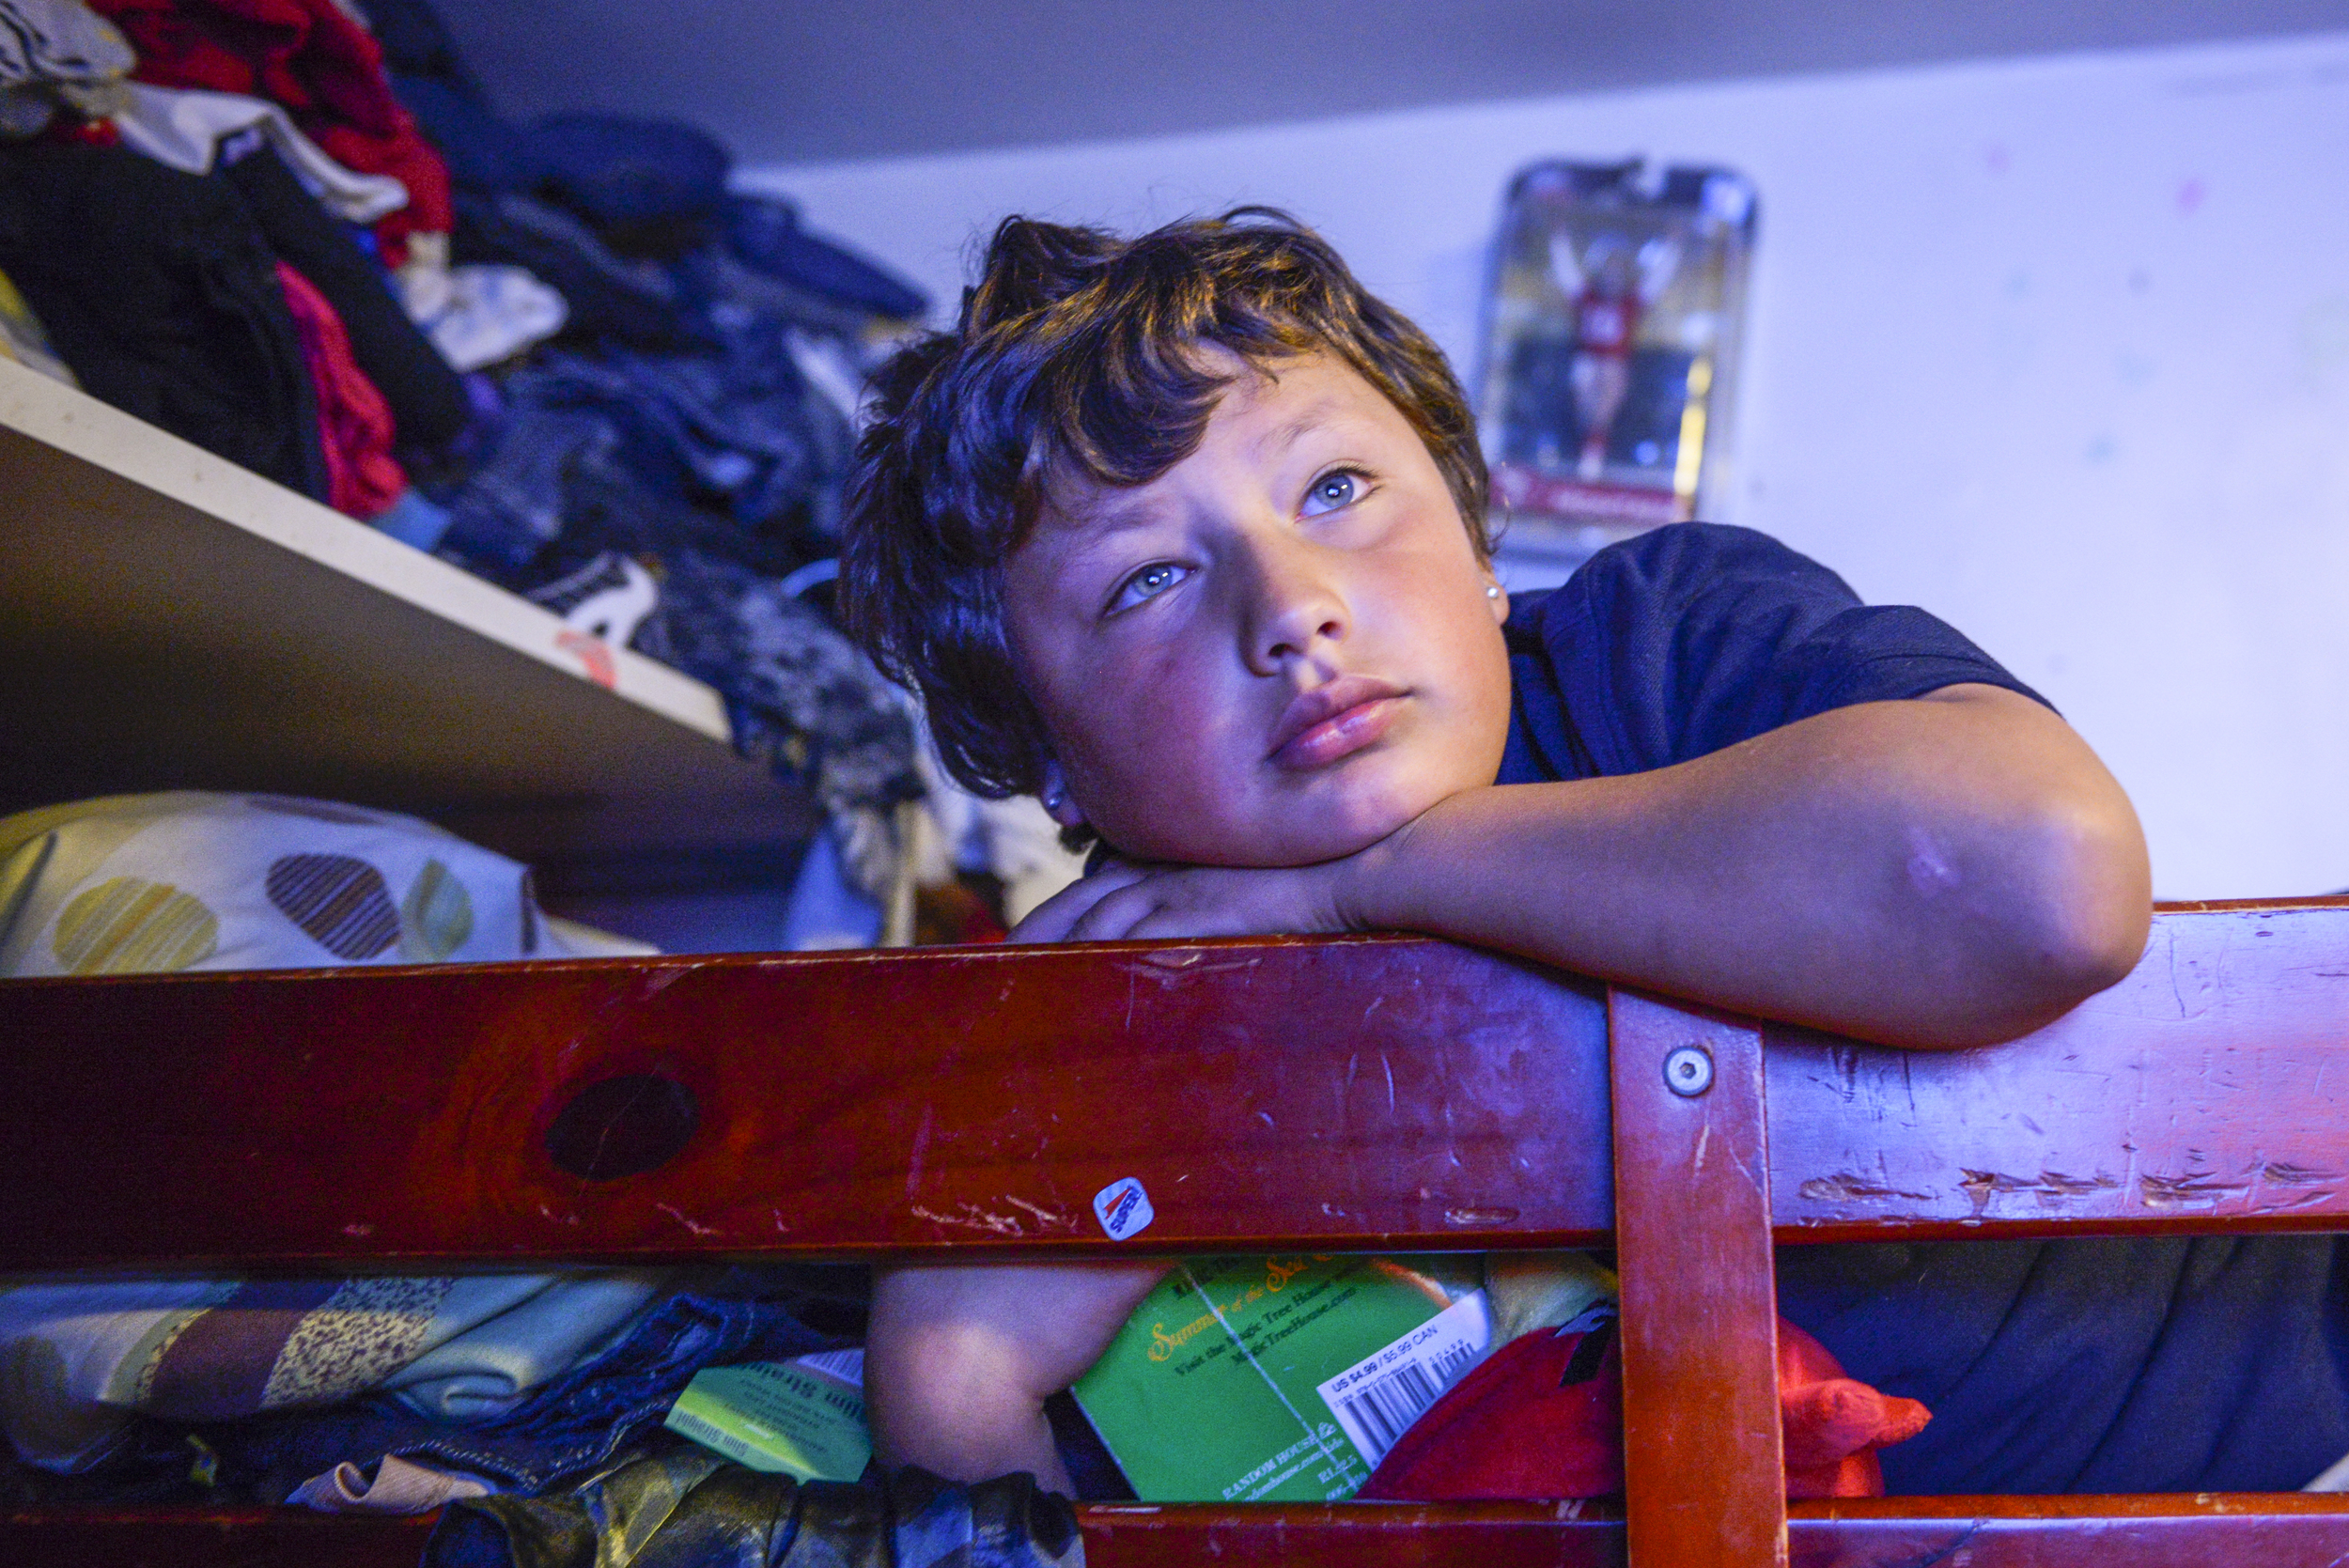  Christopher, 8, watches TV. He has been diagnosed with ADHD. 